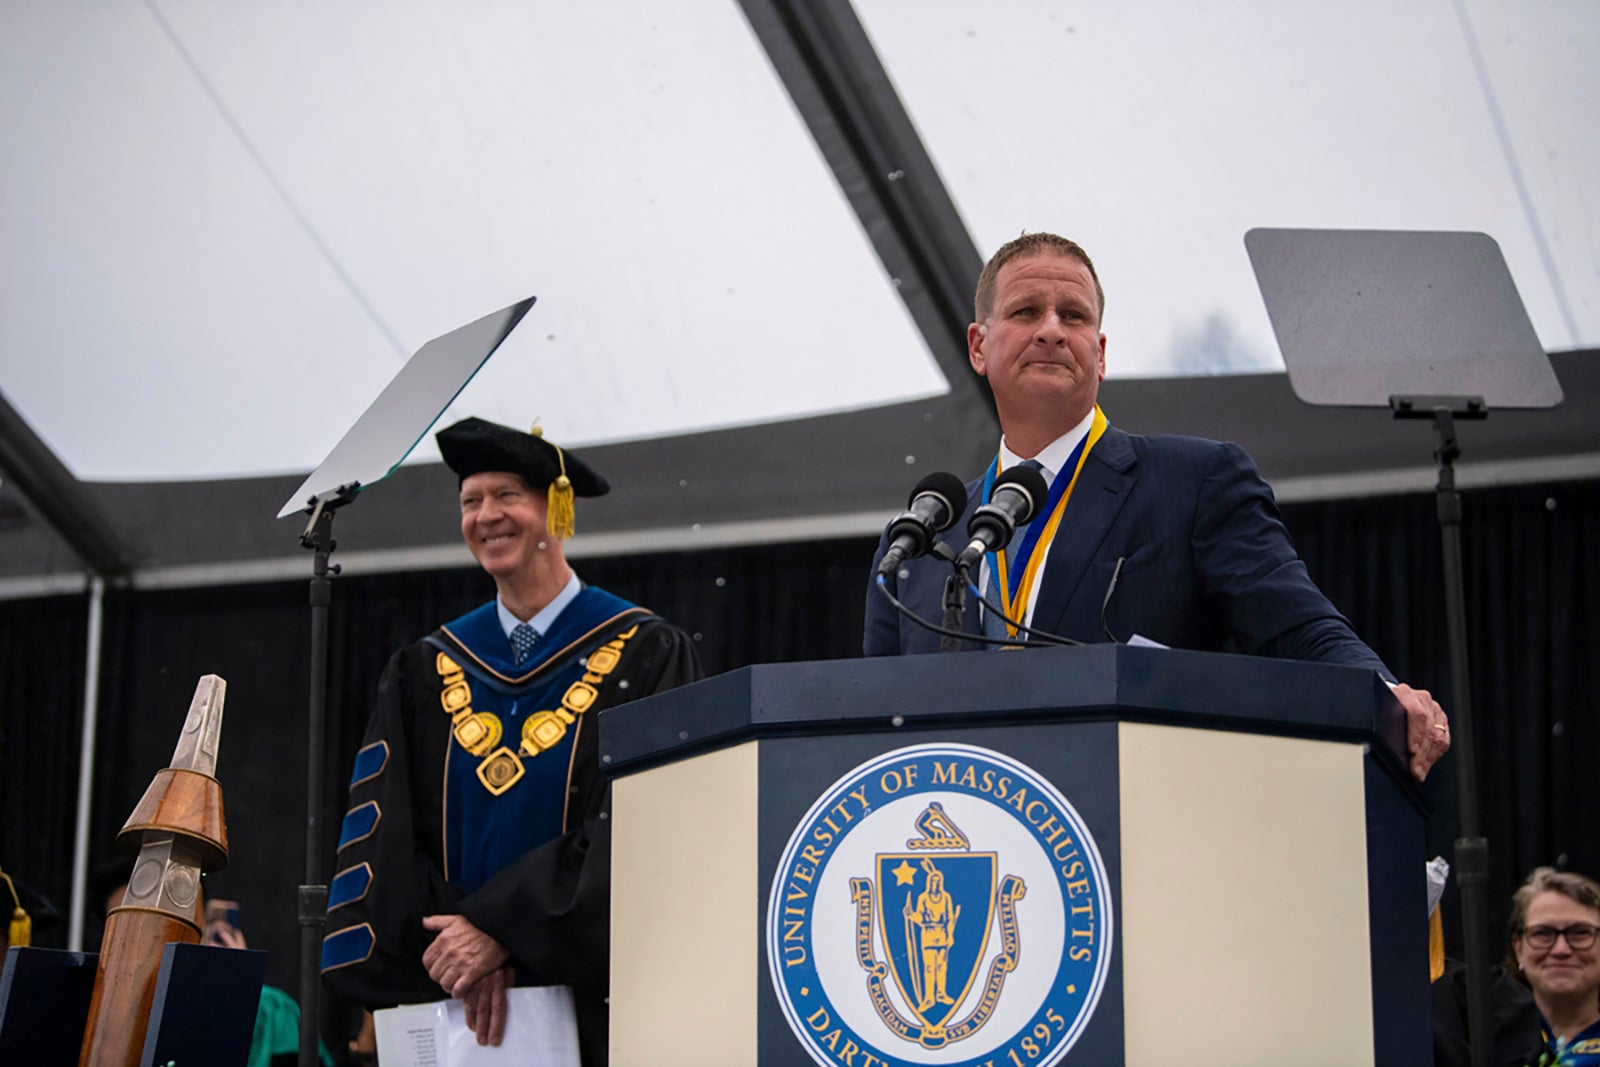 Rob Hale surprised the graduating class by pointing to a nearby truck holding envelopes stuffed with cash before security guards lugged cash-filled duffel bags onto the stage.